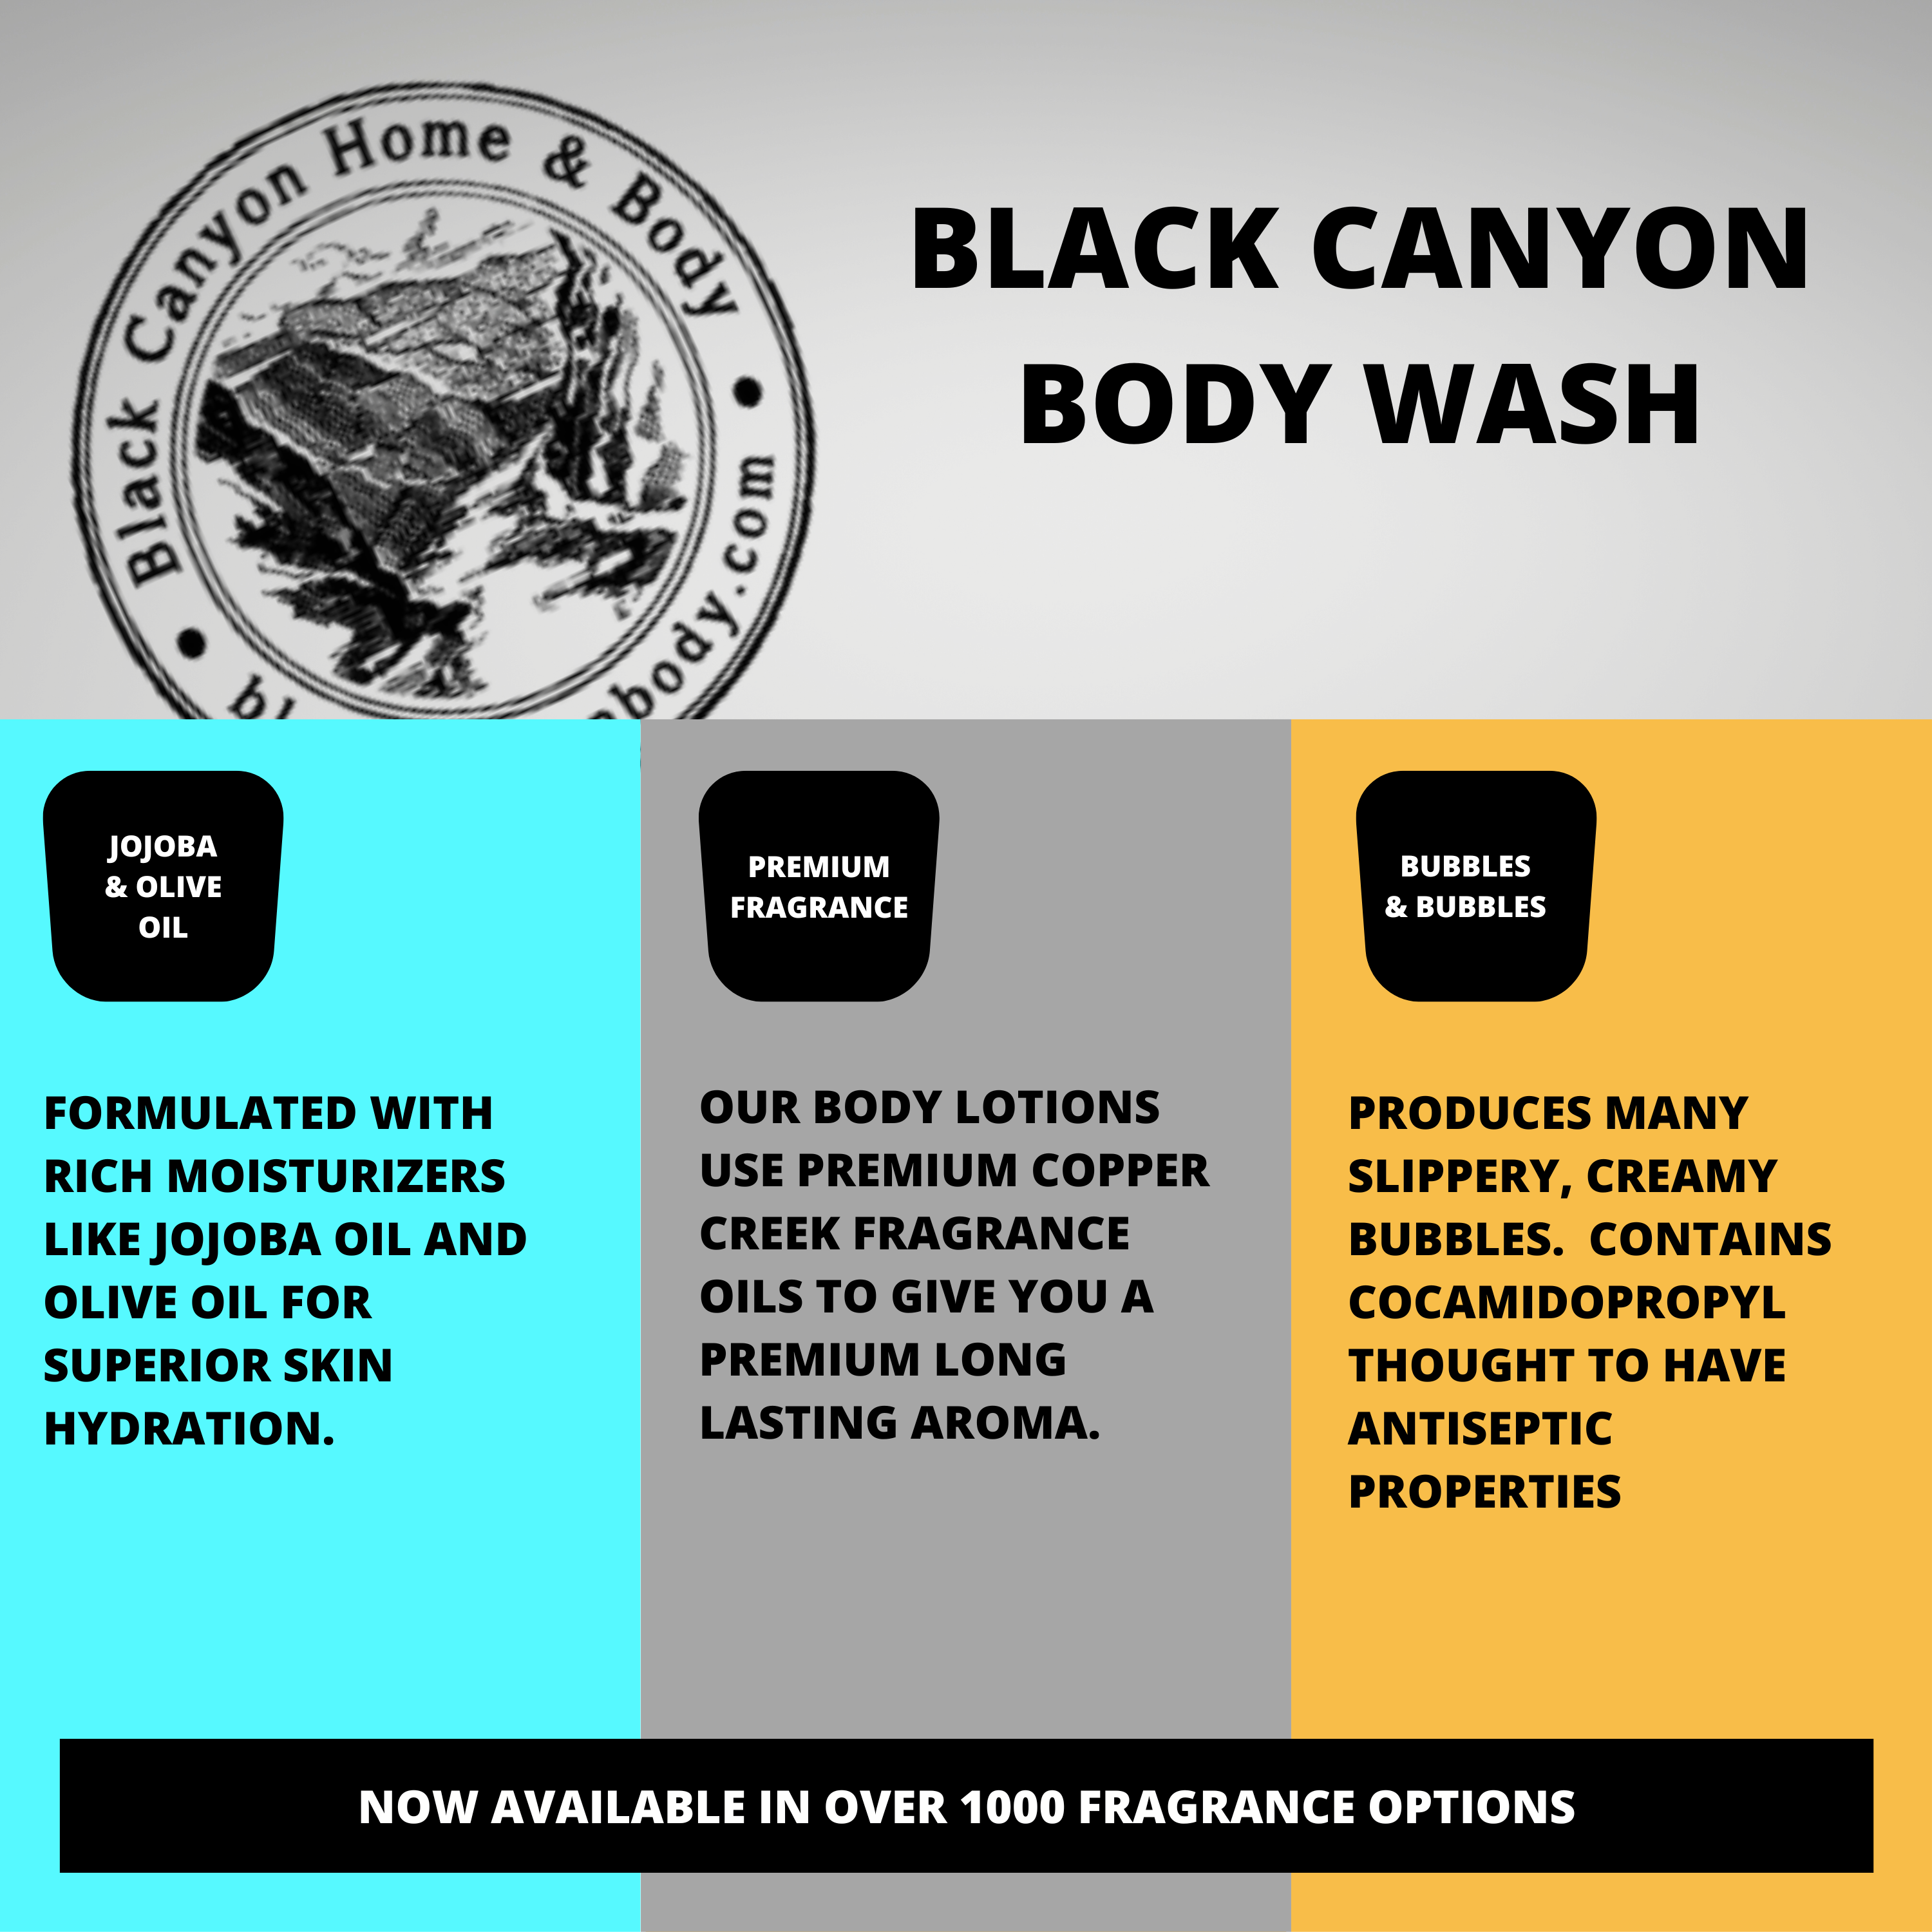 Black Canyon Peppermint Passion Scented Luxury Body Wash